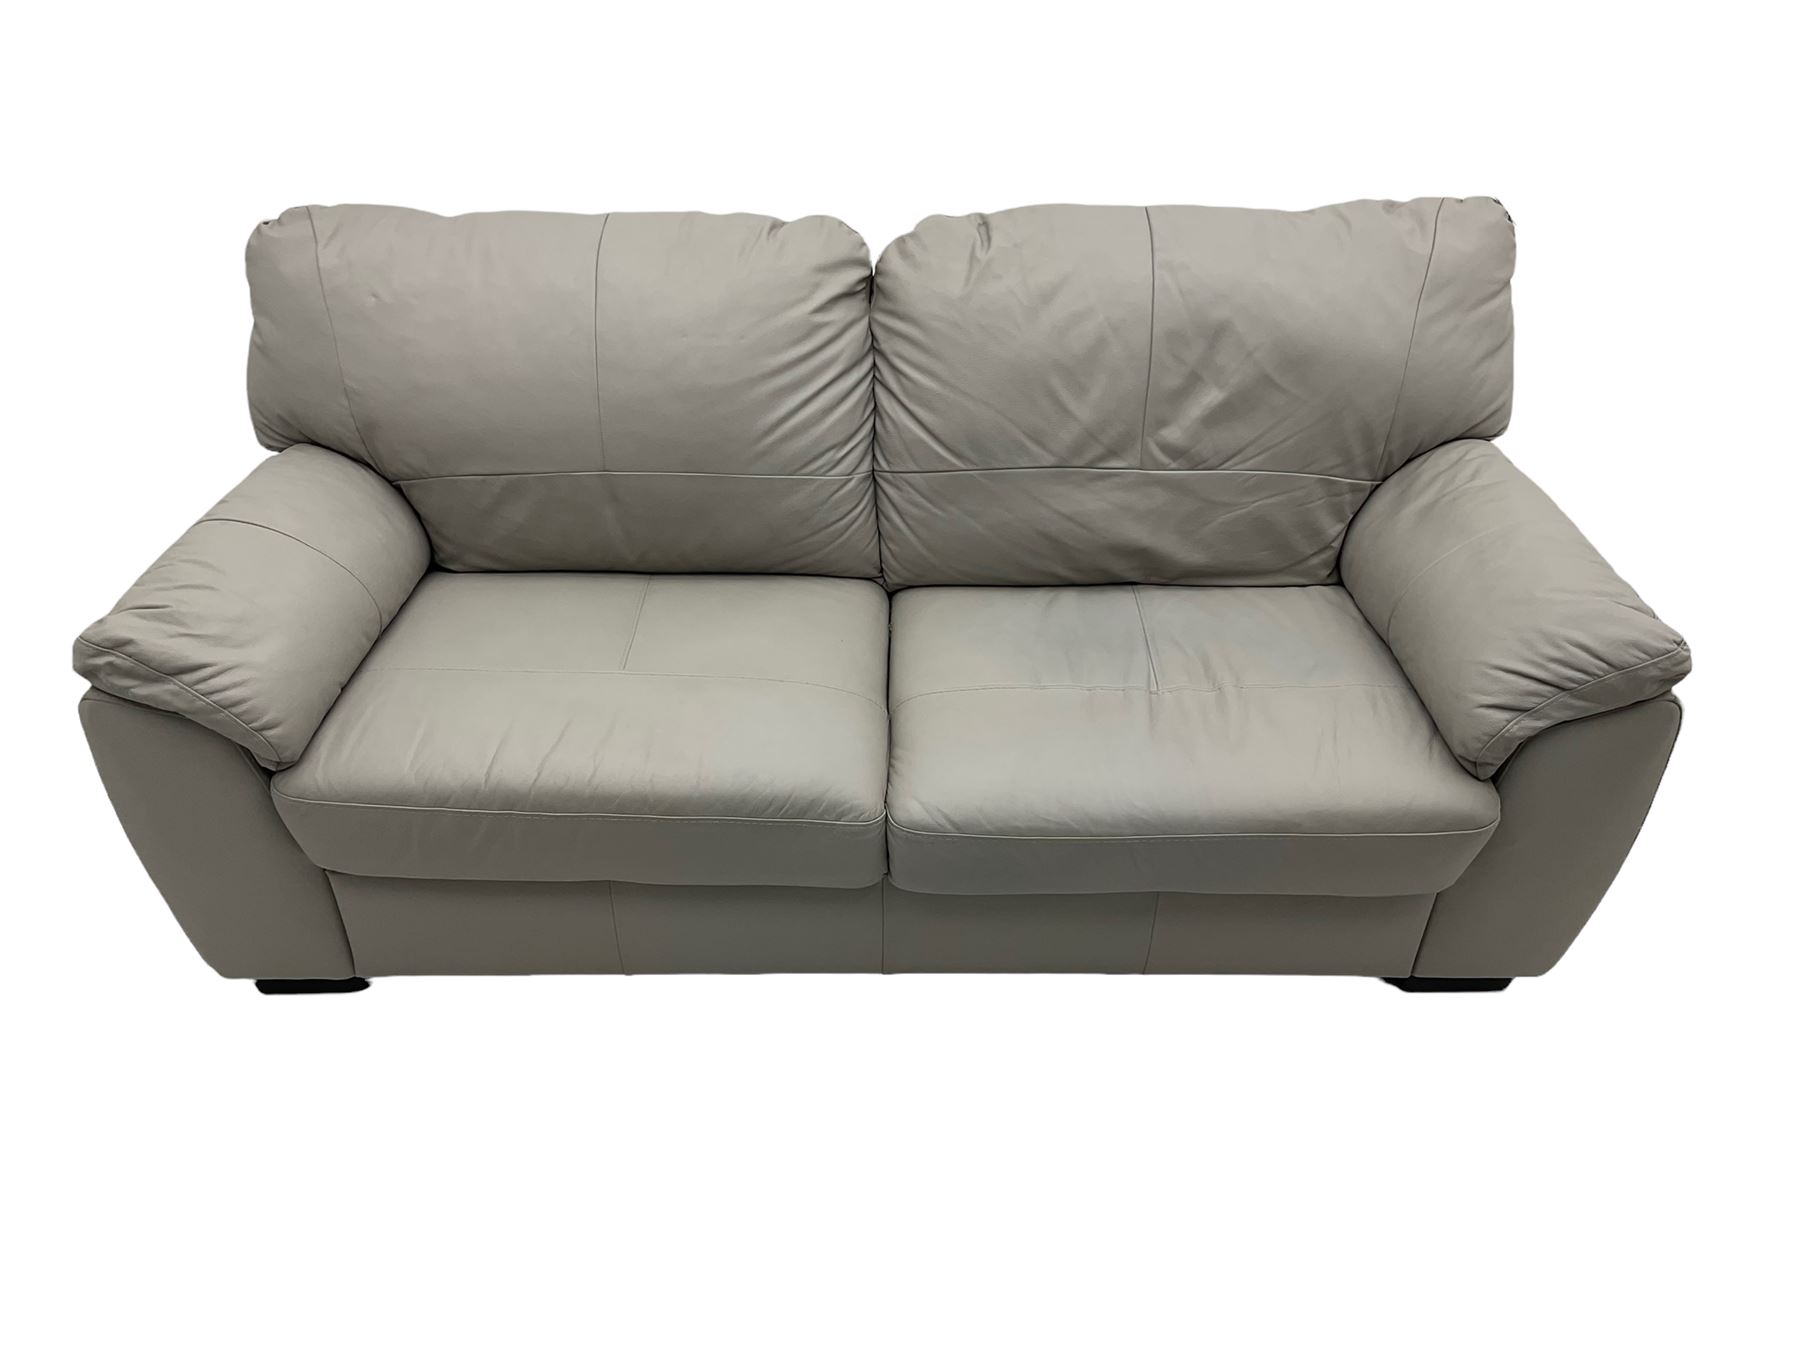 Two seat sofa (W185cm) - Image 6 of 8